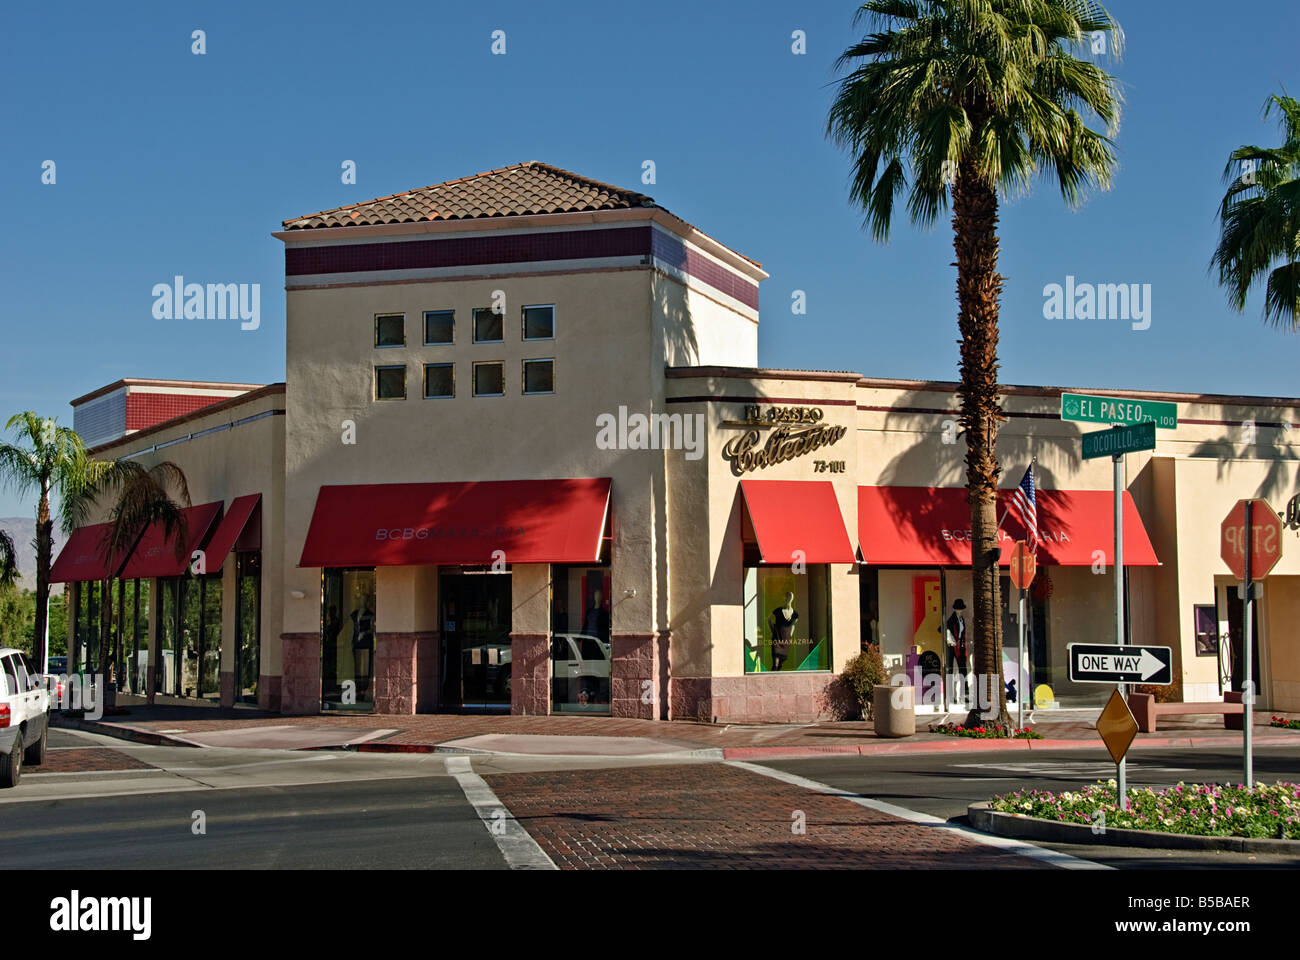 El Paseo Dining Tour of Palm Desert's The Shops on El Paseo